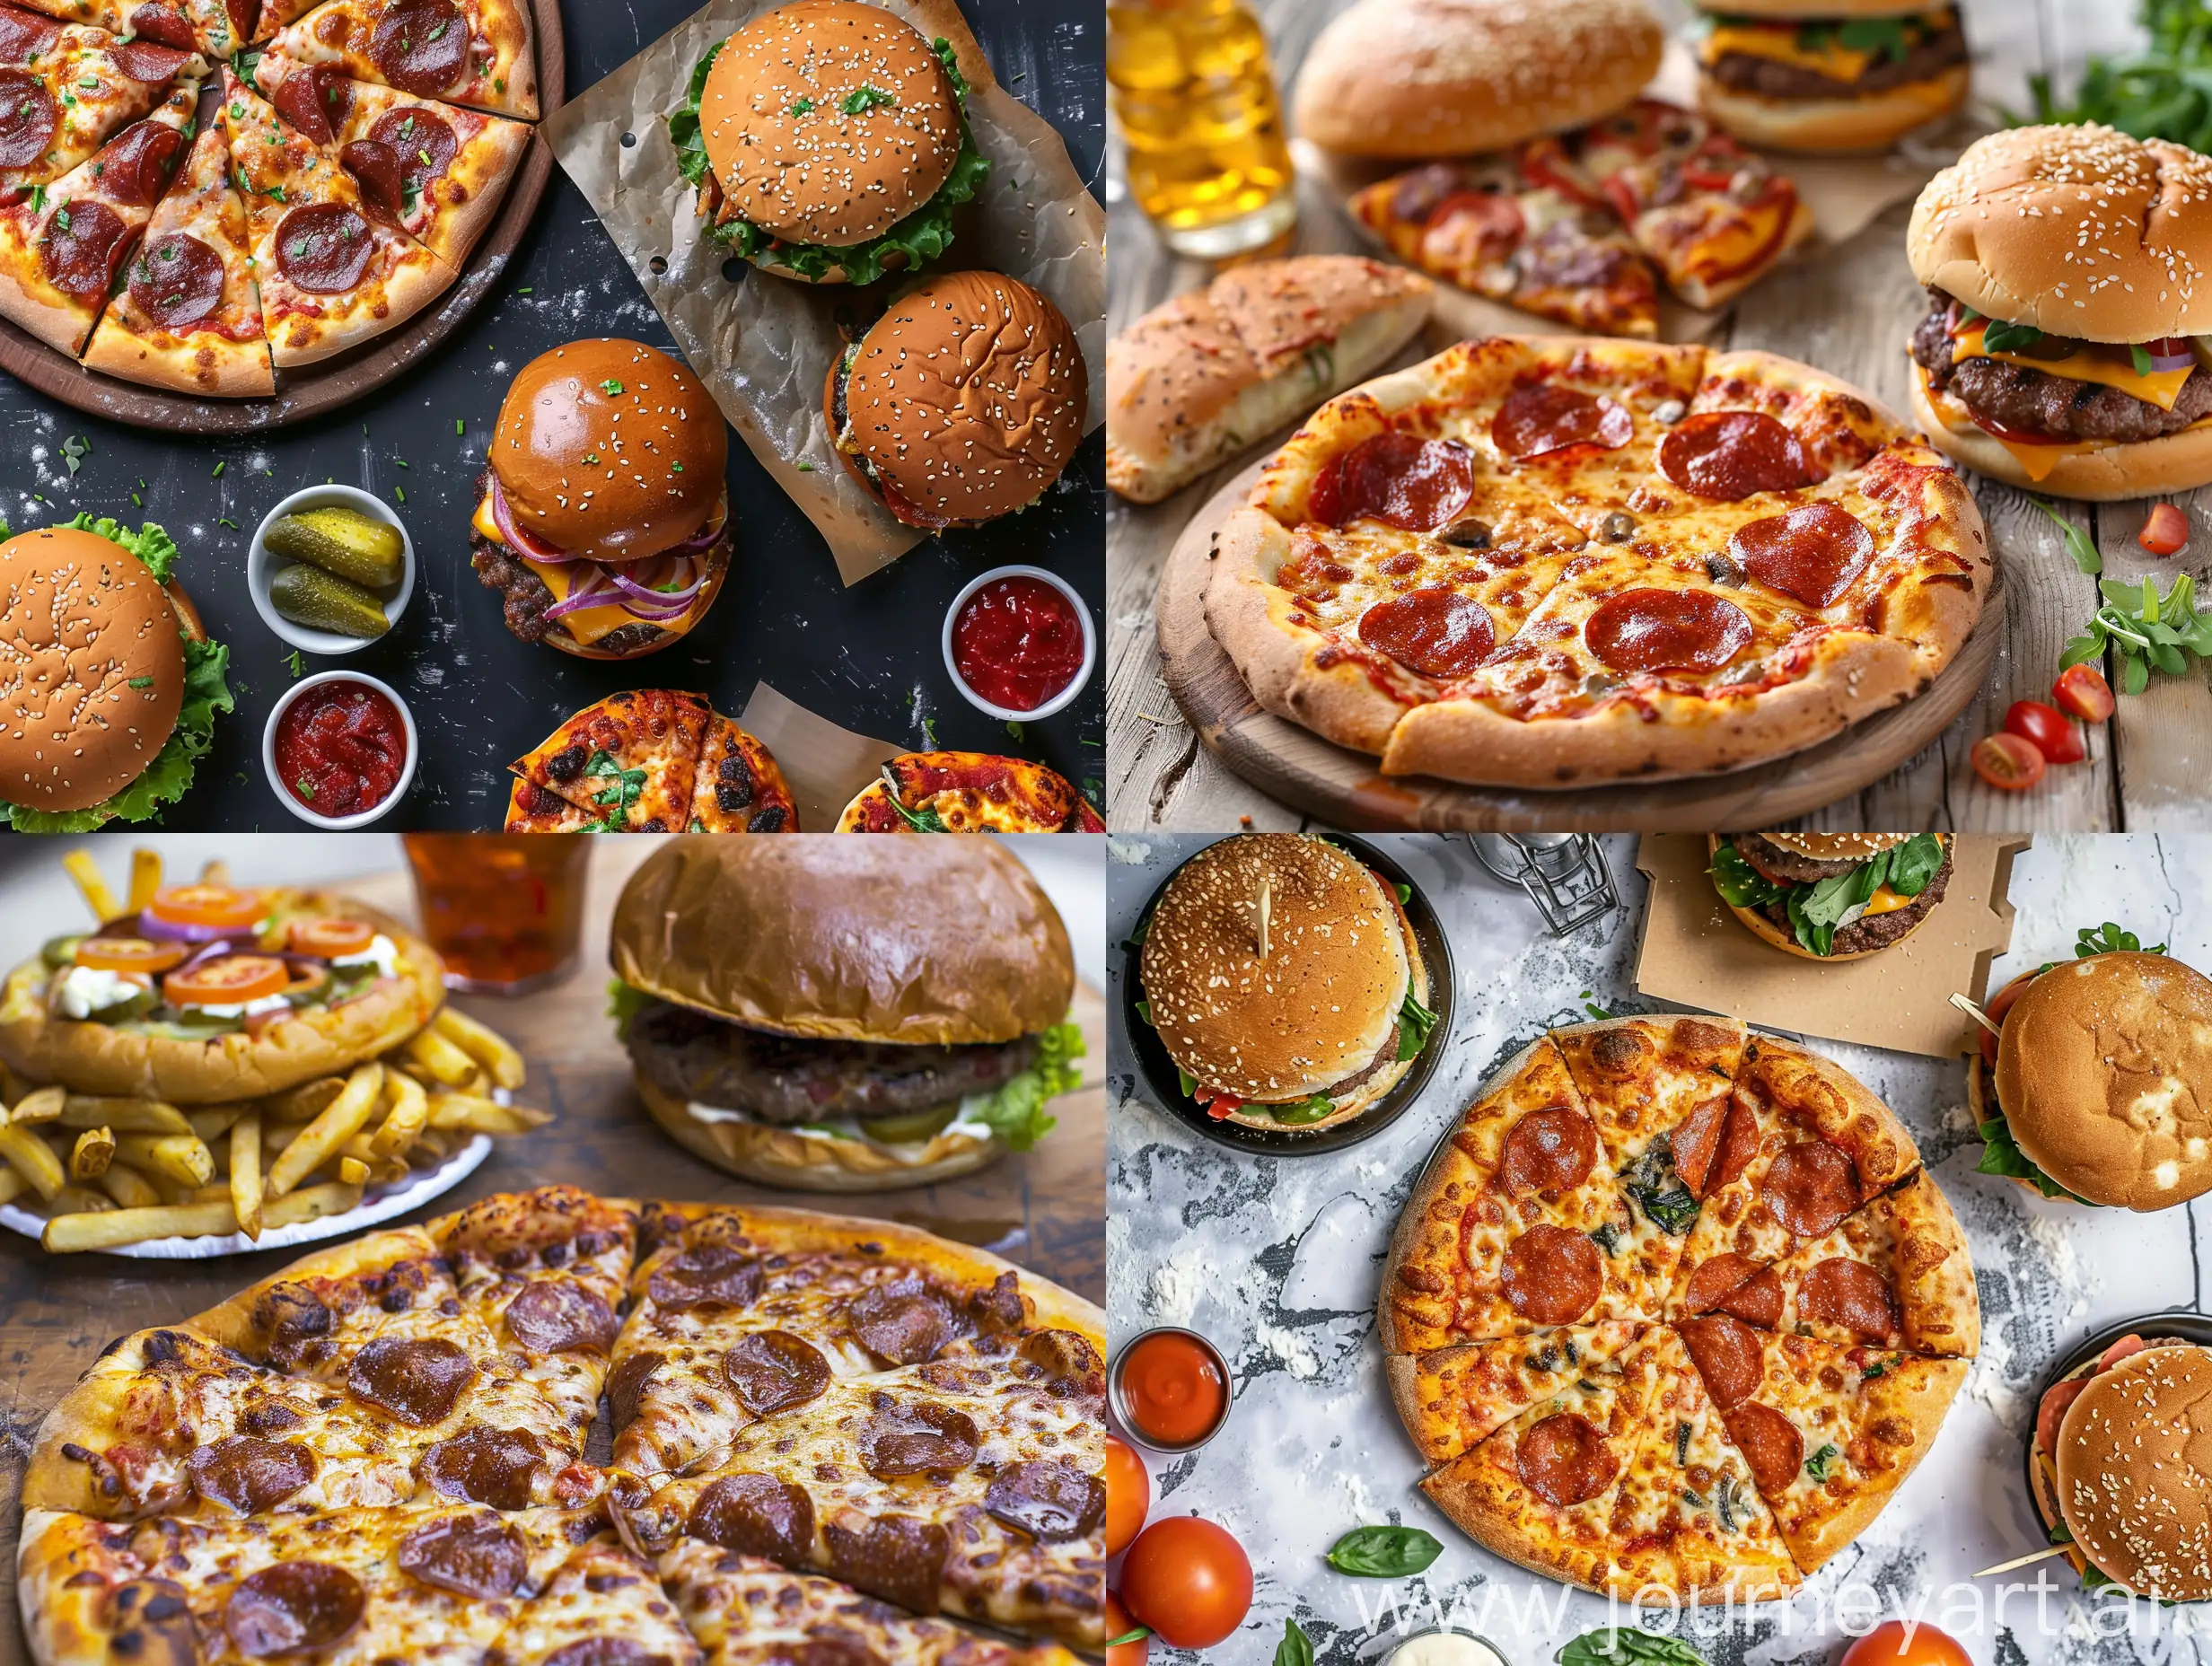 Delicious-Homemade-Pizza-and-Juicy-Burgers-on-a-Casual-Dining-Table